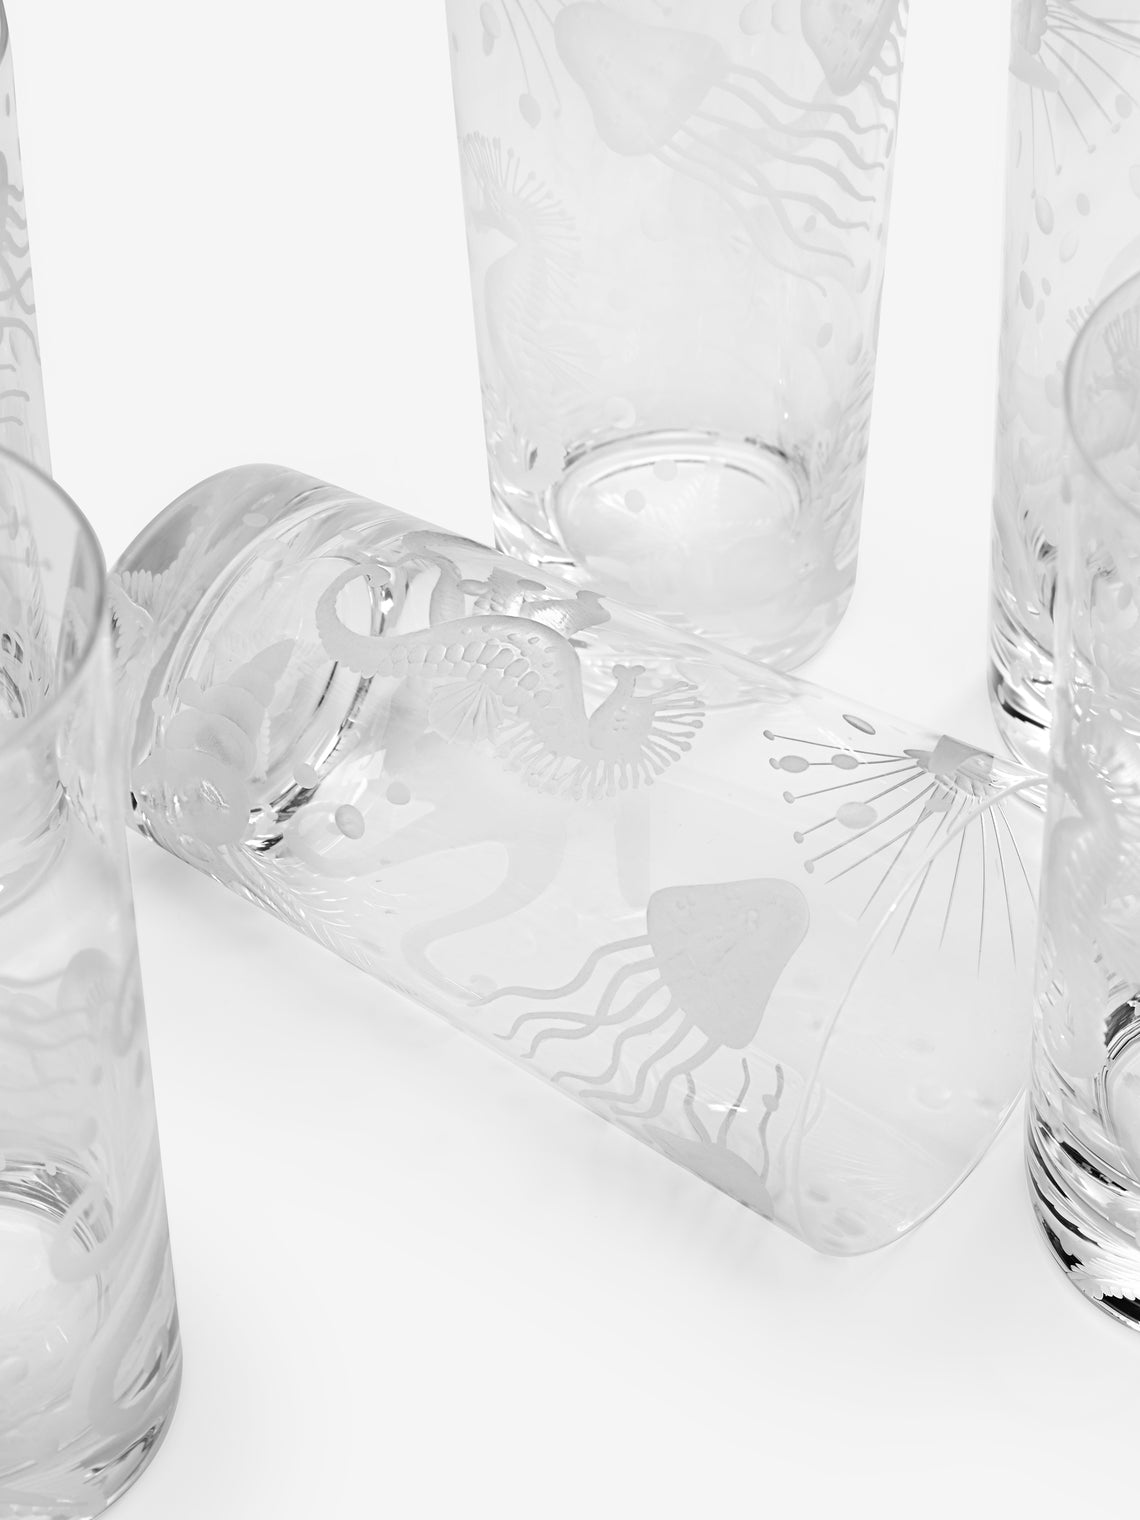 Artel - Frutti di Mare Hand-Engraved Crystal Highballs (Set of 6) -  - ABASK